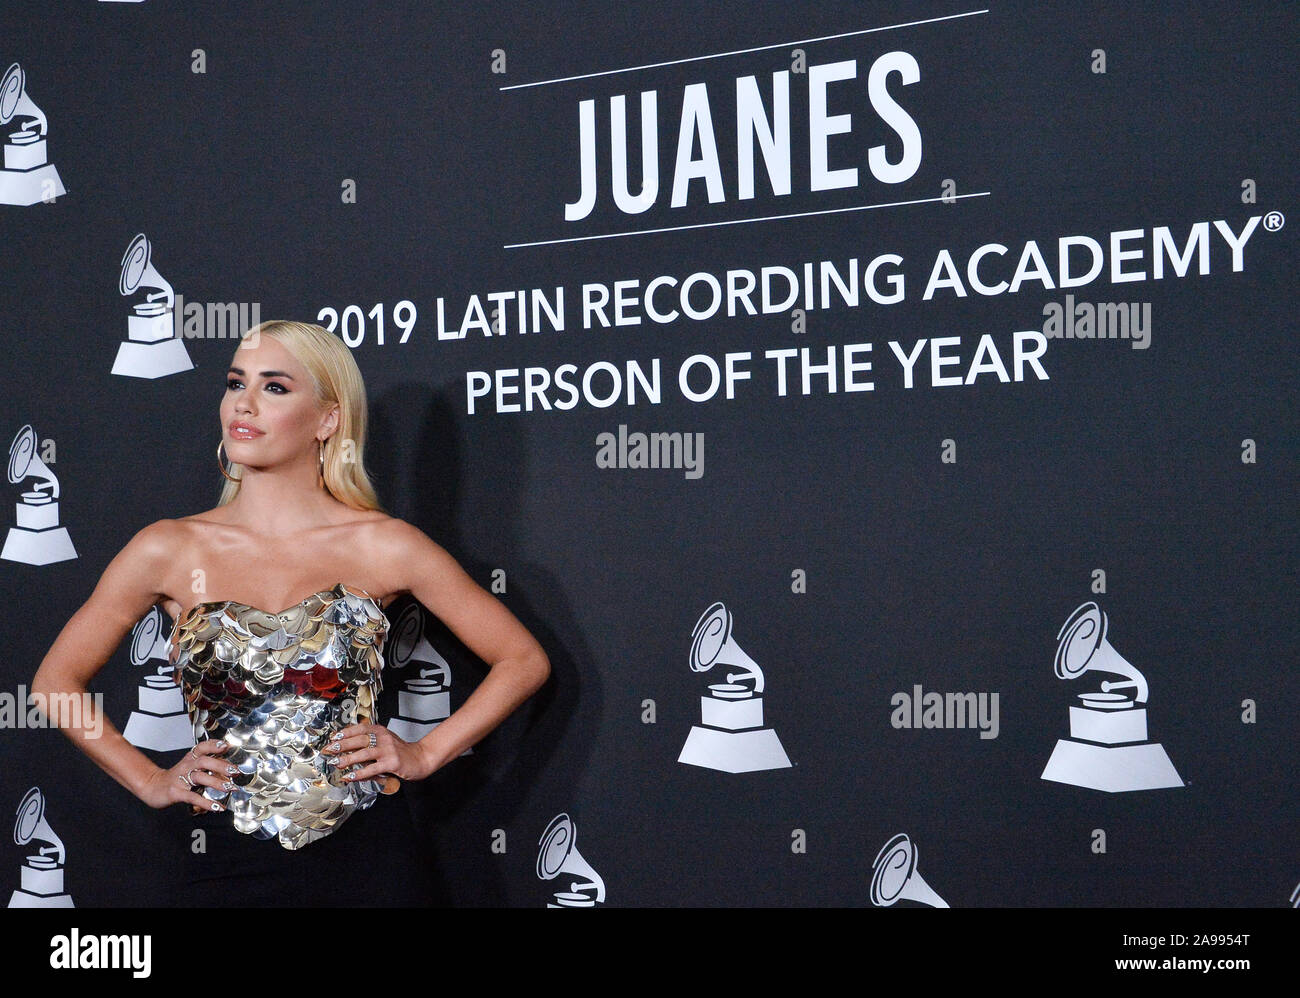 Las Vegas, United States. 13th Nov, 2019. Singer Lali arrives for the Latin Grammy Person of the Year gala honoring Columbian singer Juanes at the MGM Grand Convention Center in Las Vegas, Nevada on Wednesday, November 13, 2019. Photo by Jim Ruymen/UPI Credit: UPI/Alamy Live News Stock Photo